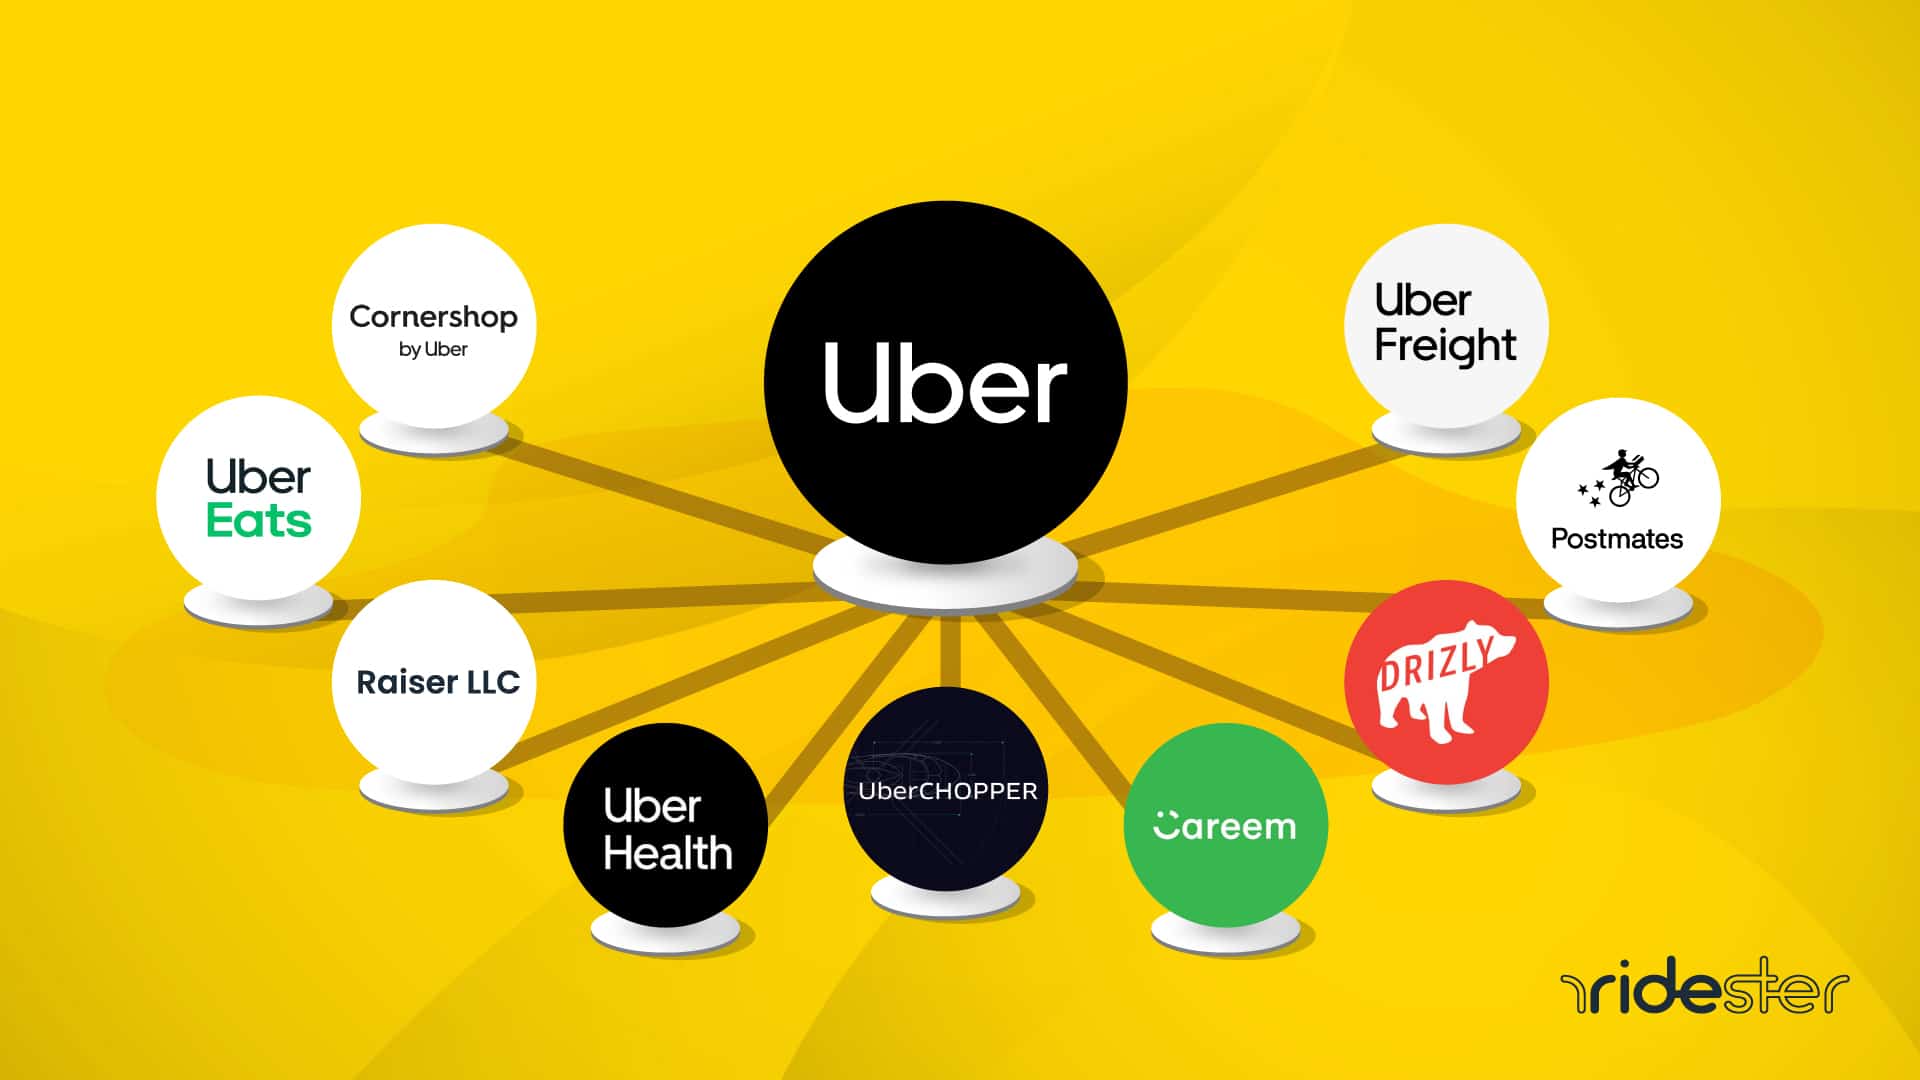 vector graphic showing an uber logo surrounded by the various uber subsidiaries the company operates as business units